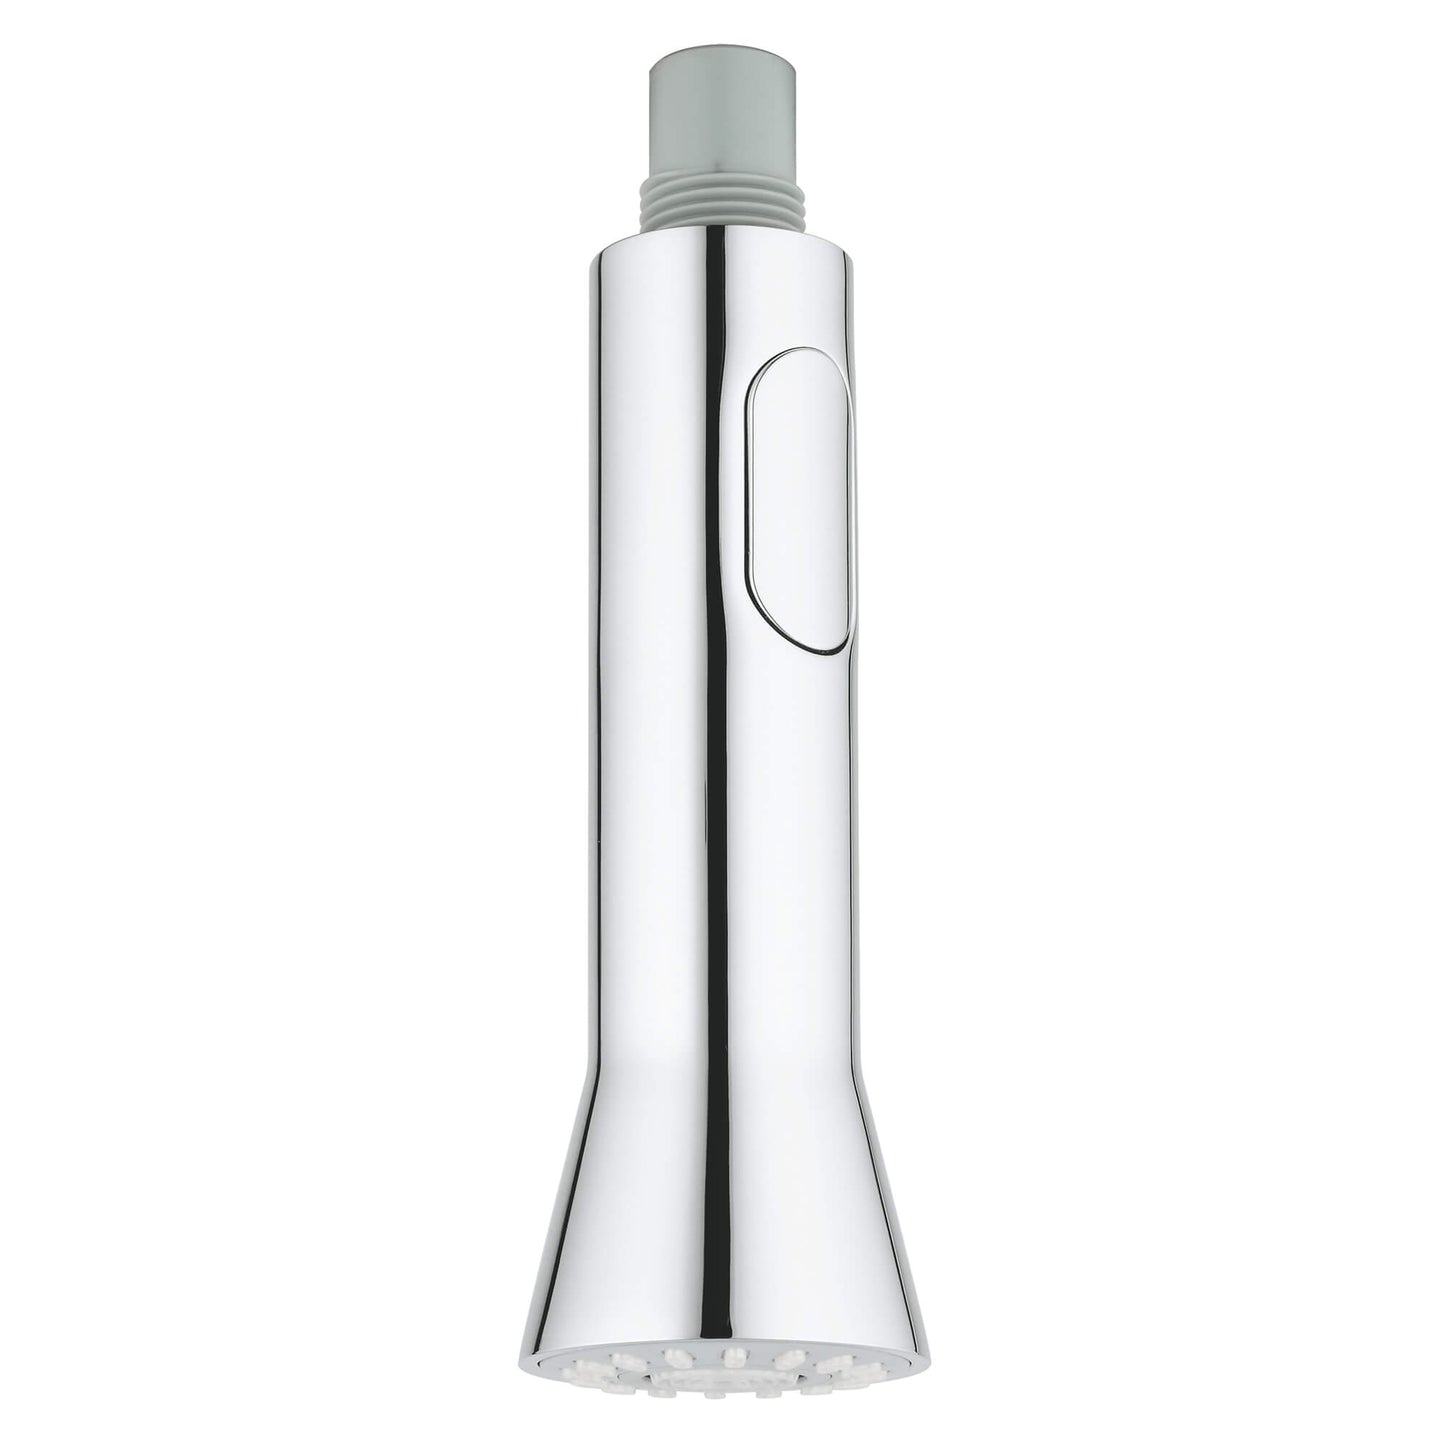 GROHE 46731000 Universal Chrome Pull-Out Spray